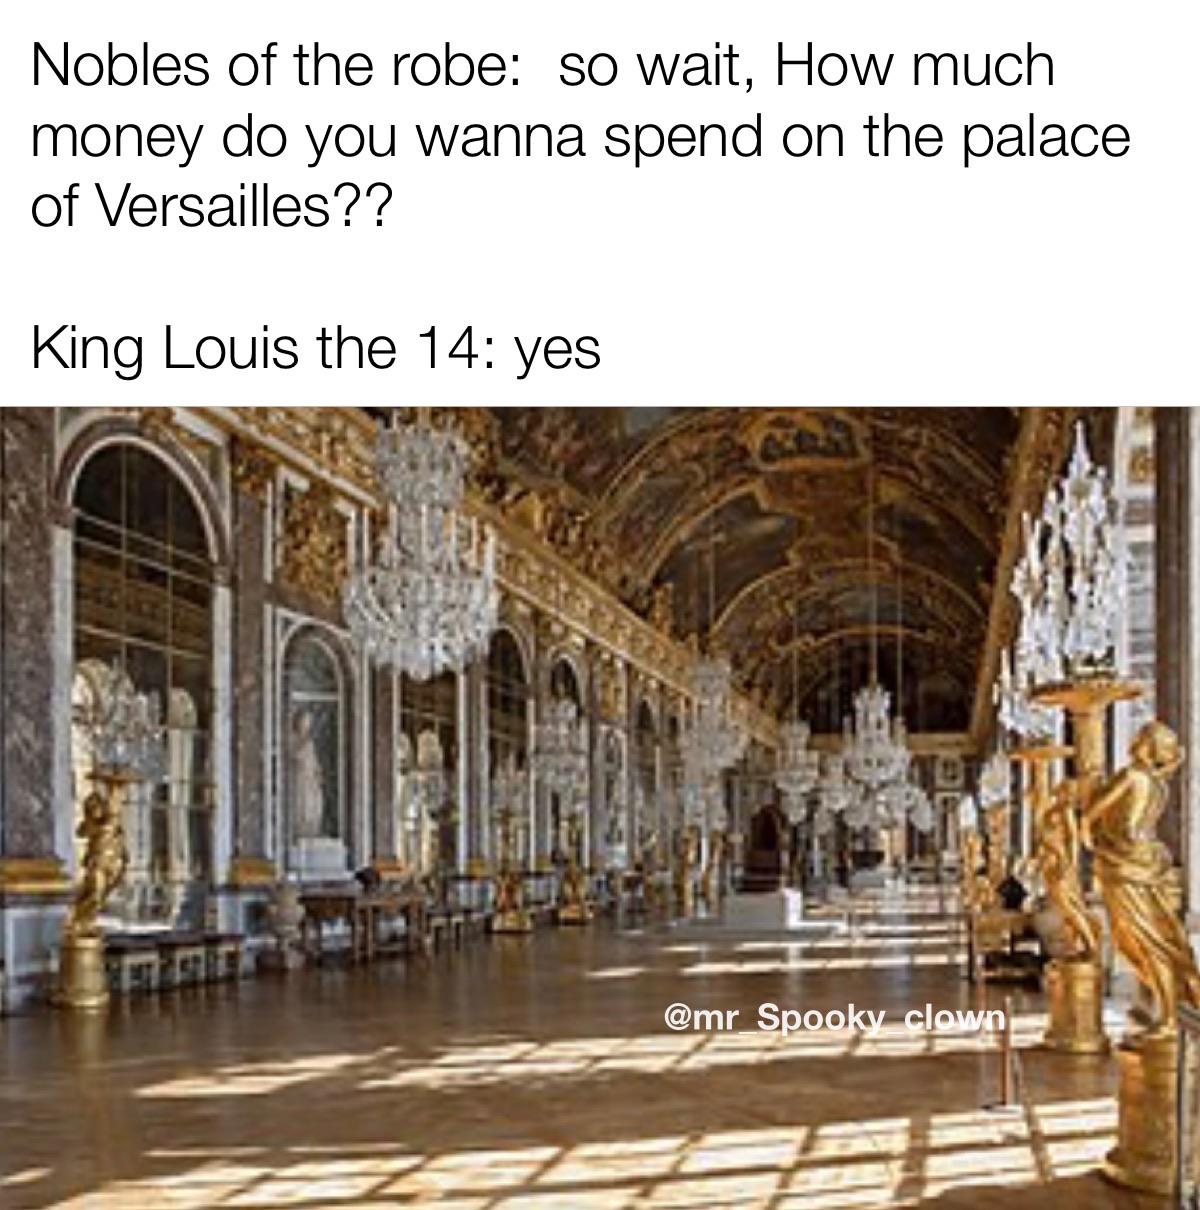 history history-memes history text: Nobles of the robe: so wait, How much money do you wanna spend on the palace of Versailles?? King Louis the 14: yes @mr S o 